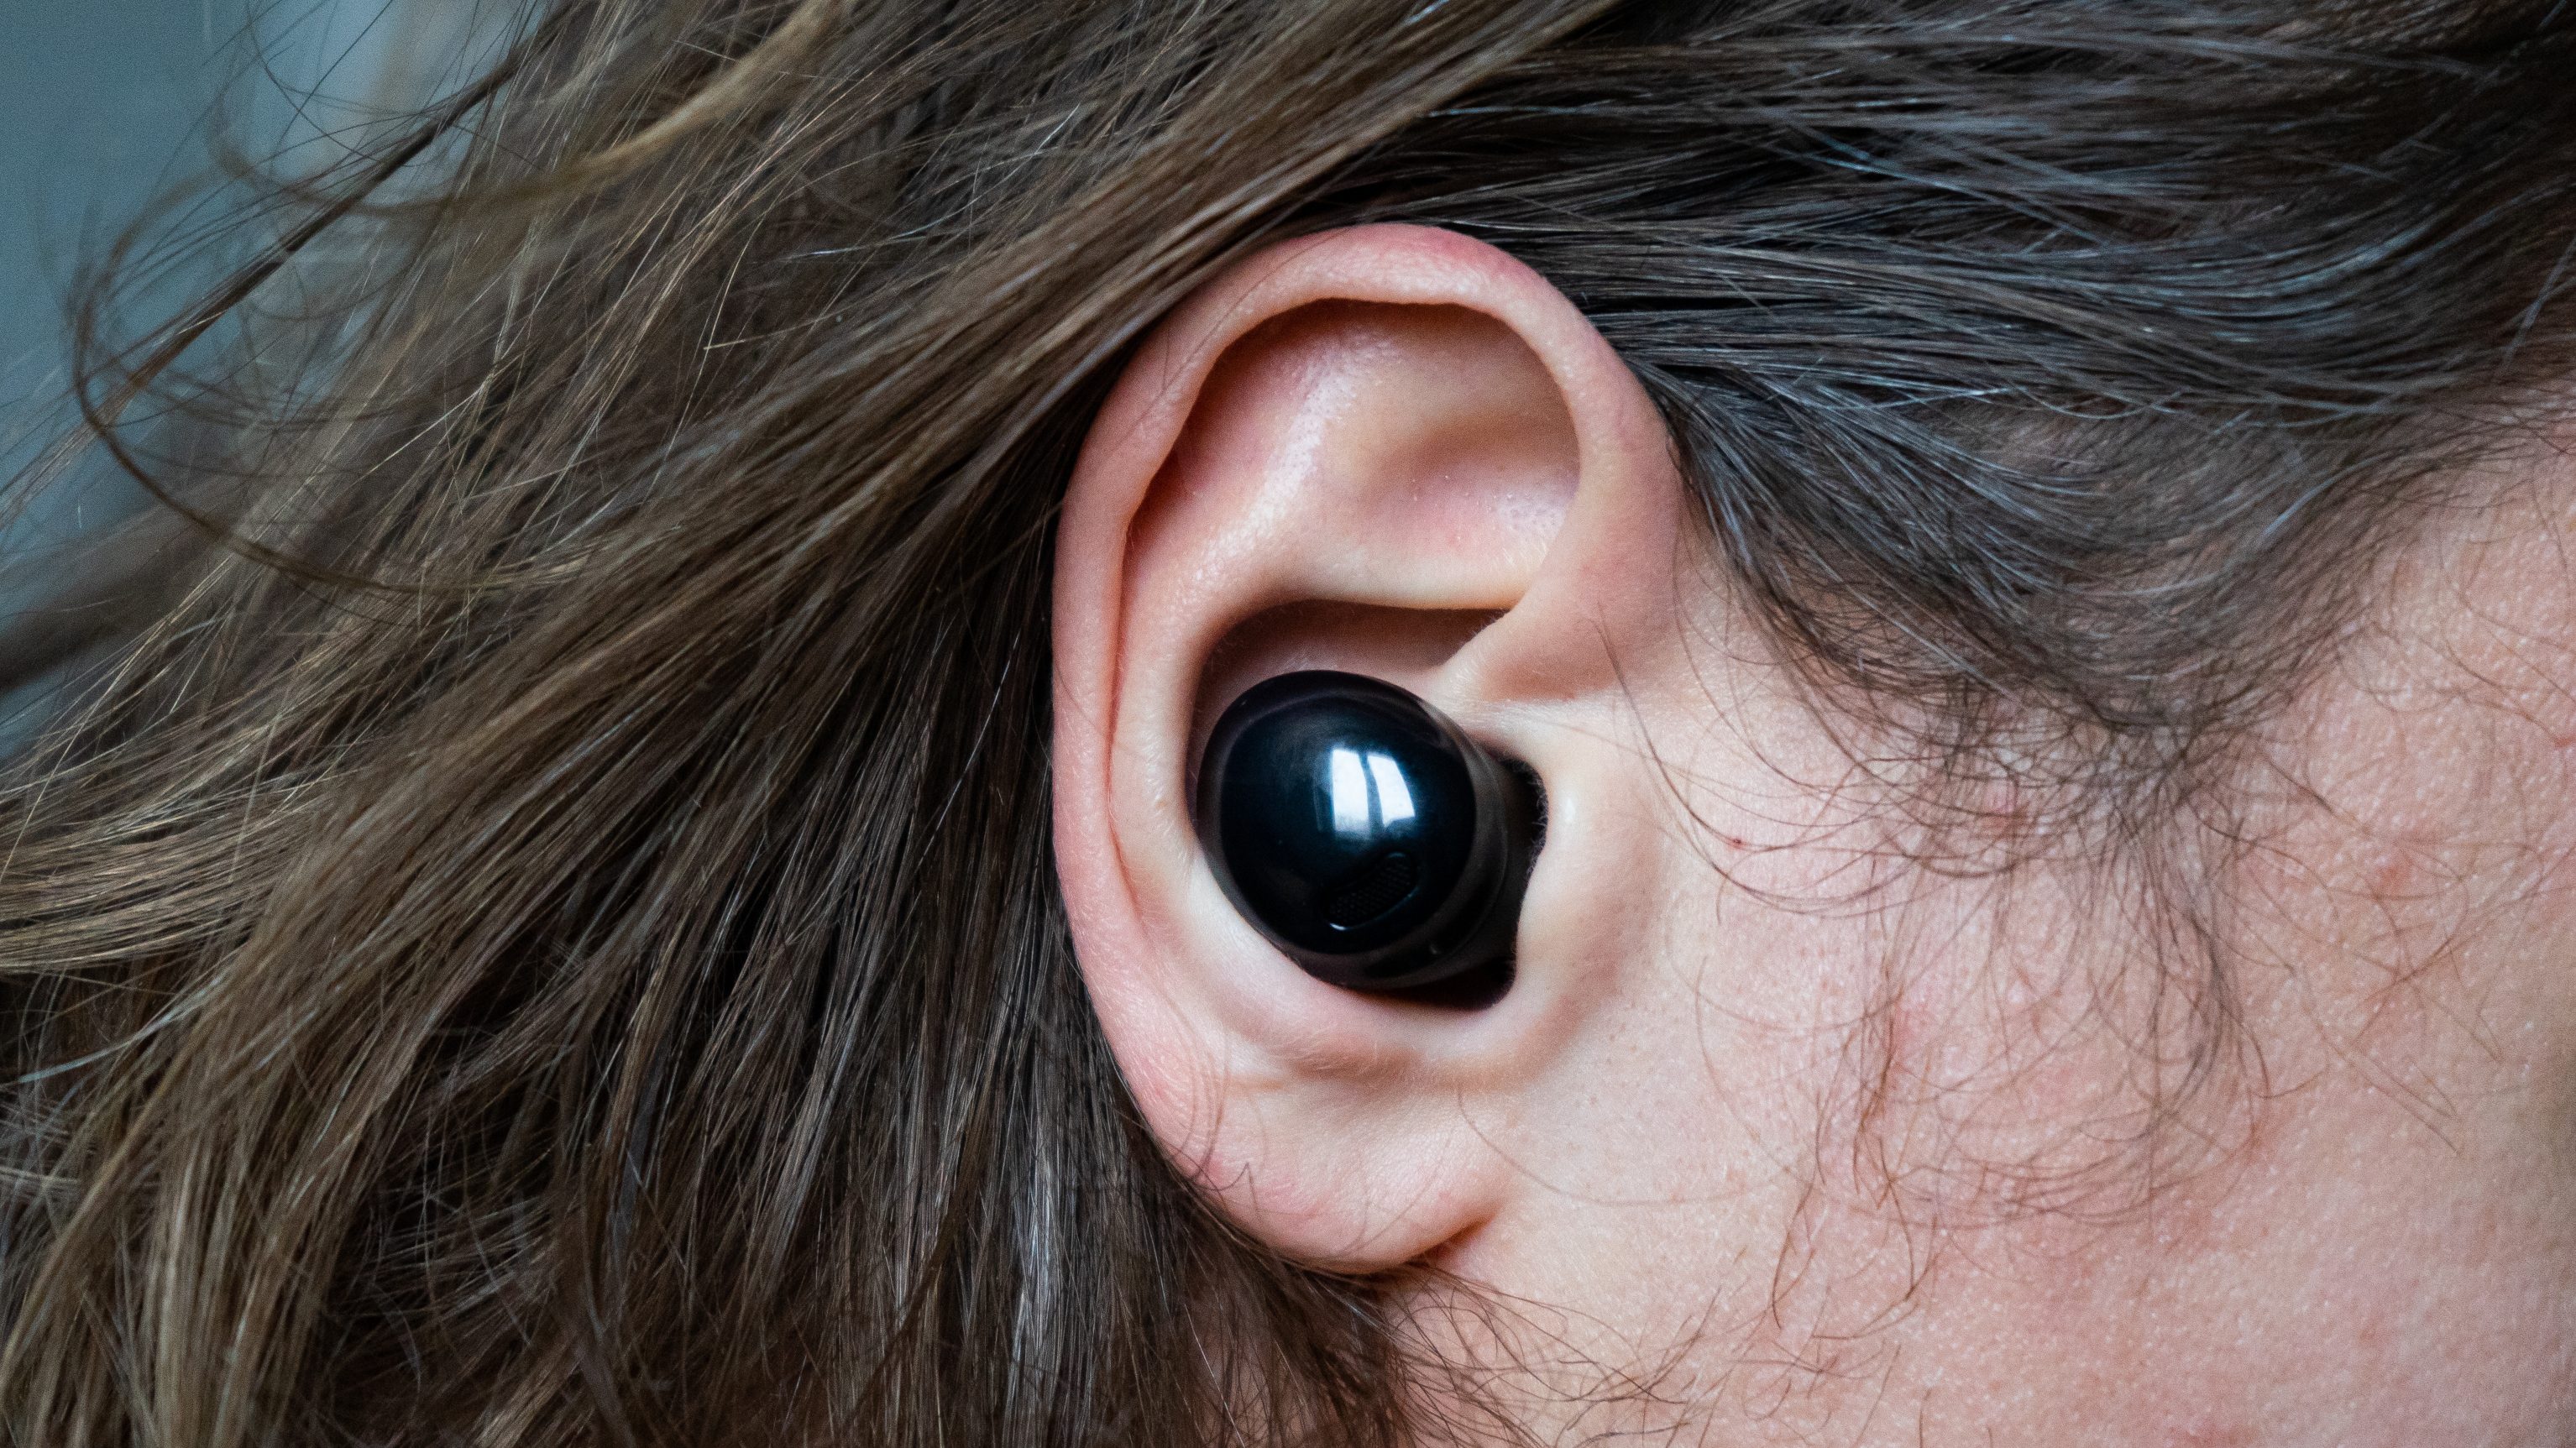 Samsung launches the Galaxy Buds FE, brings ANC to the budget range